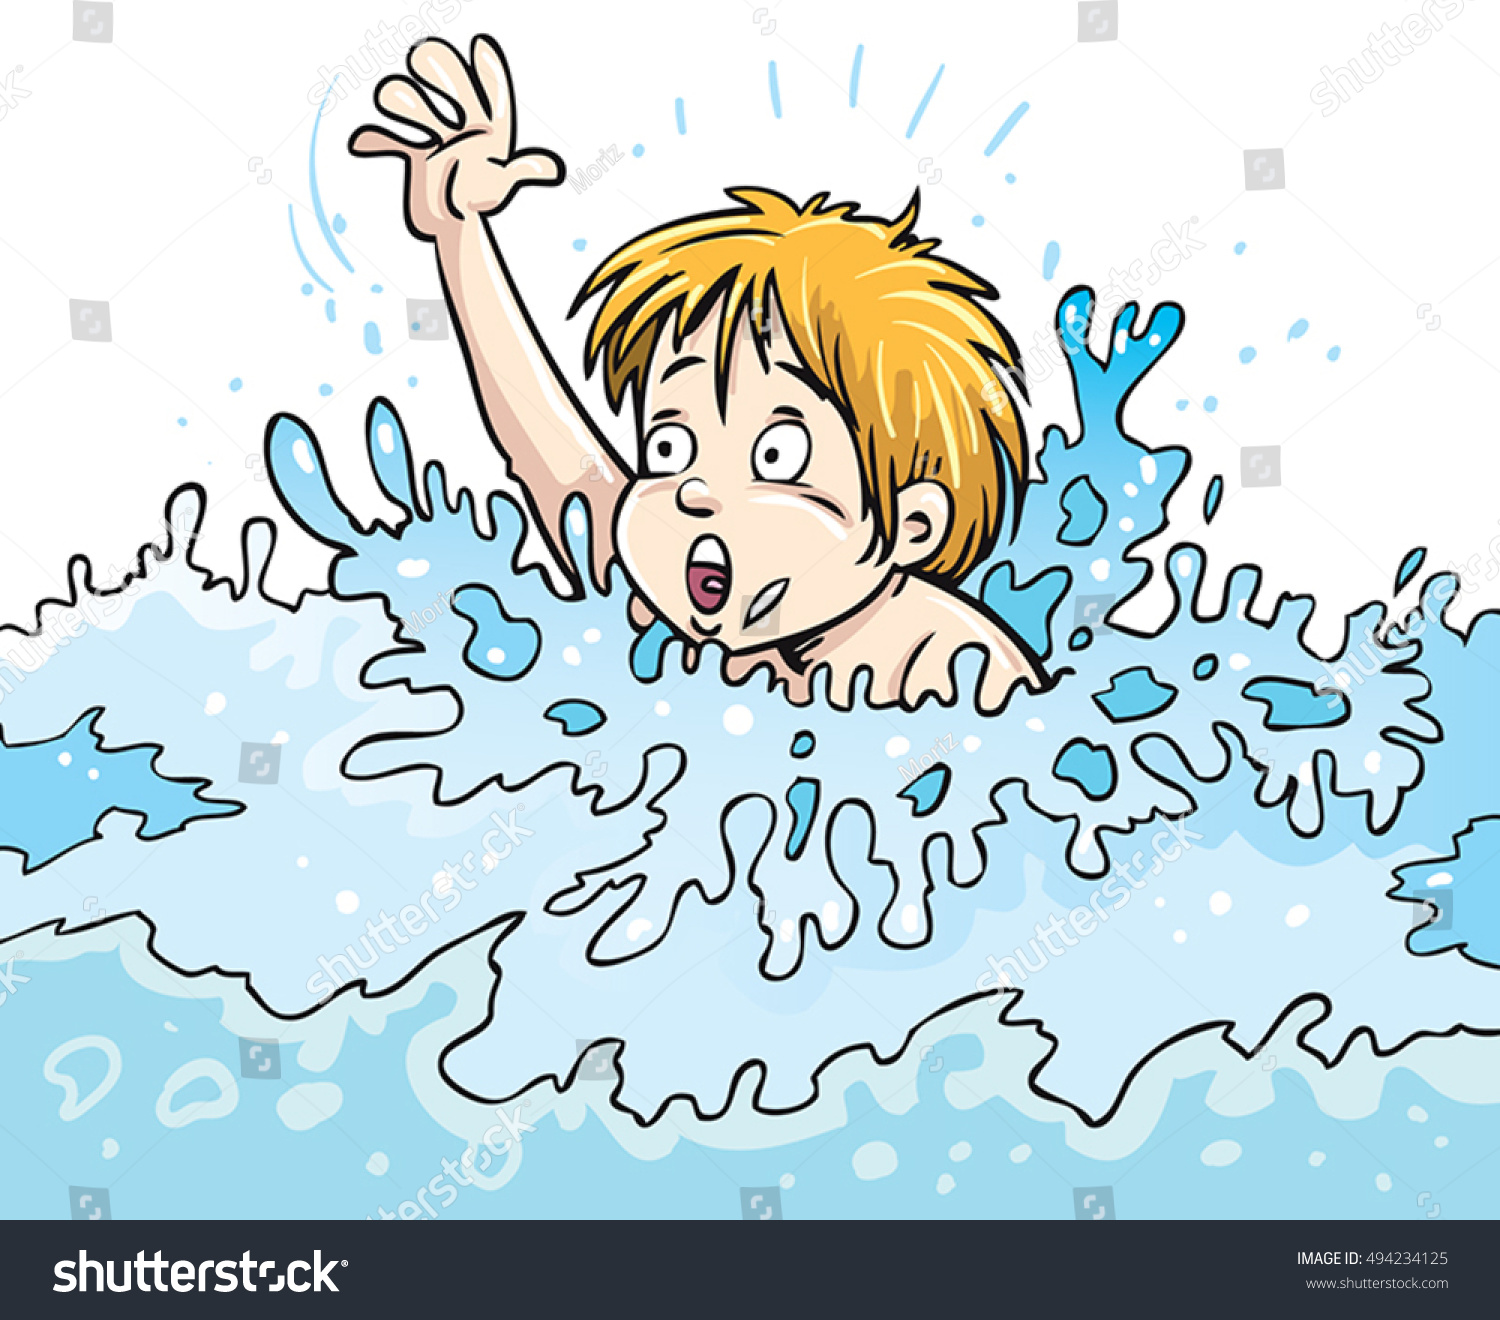 159 Boy drowning in swimming pool Stock Illustrations, Images & Vectors ...